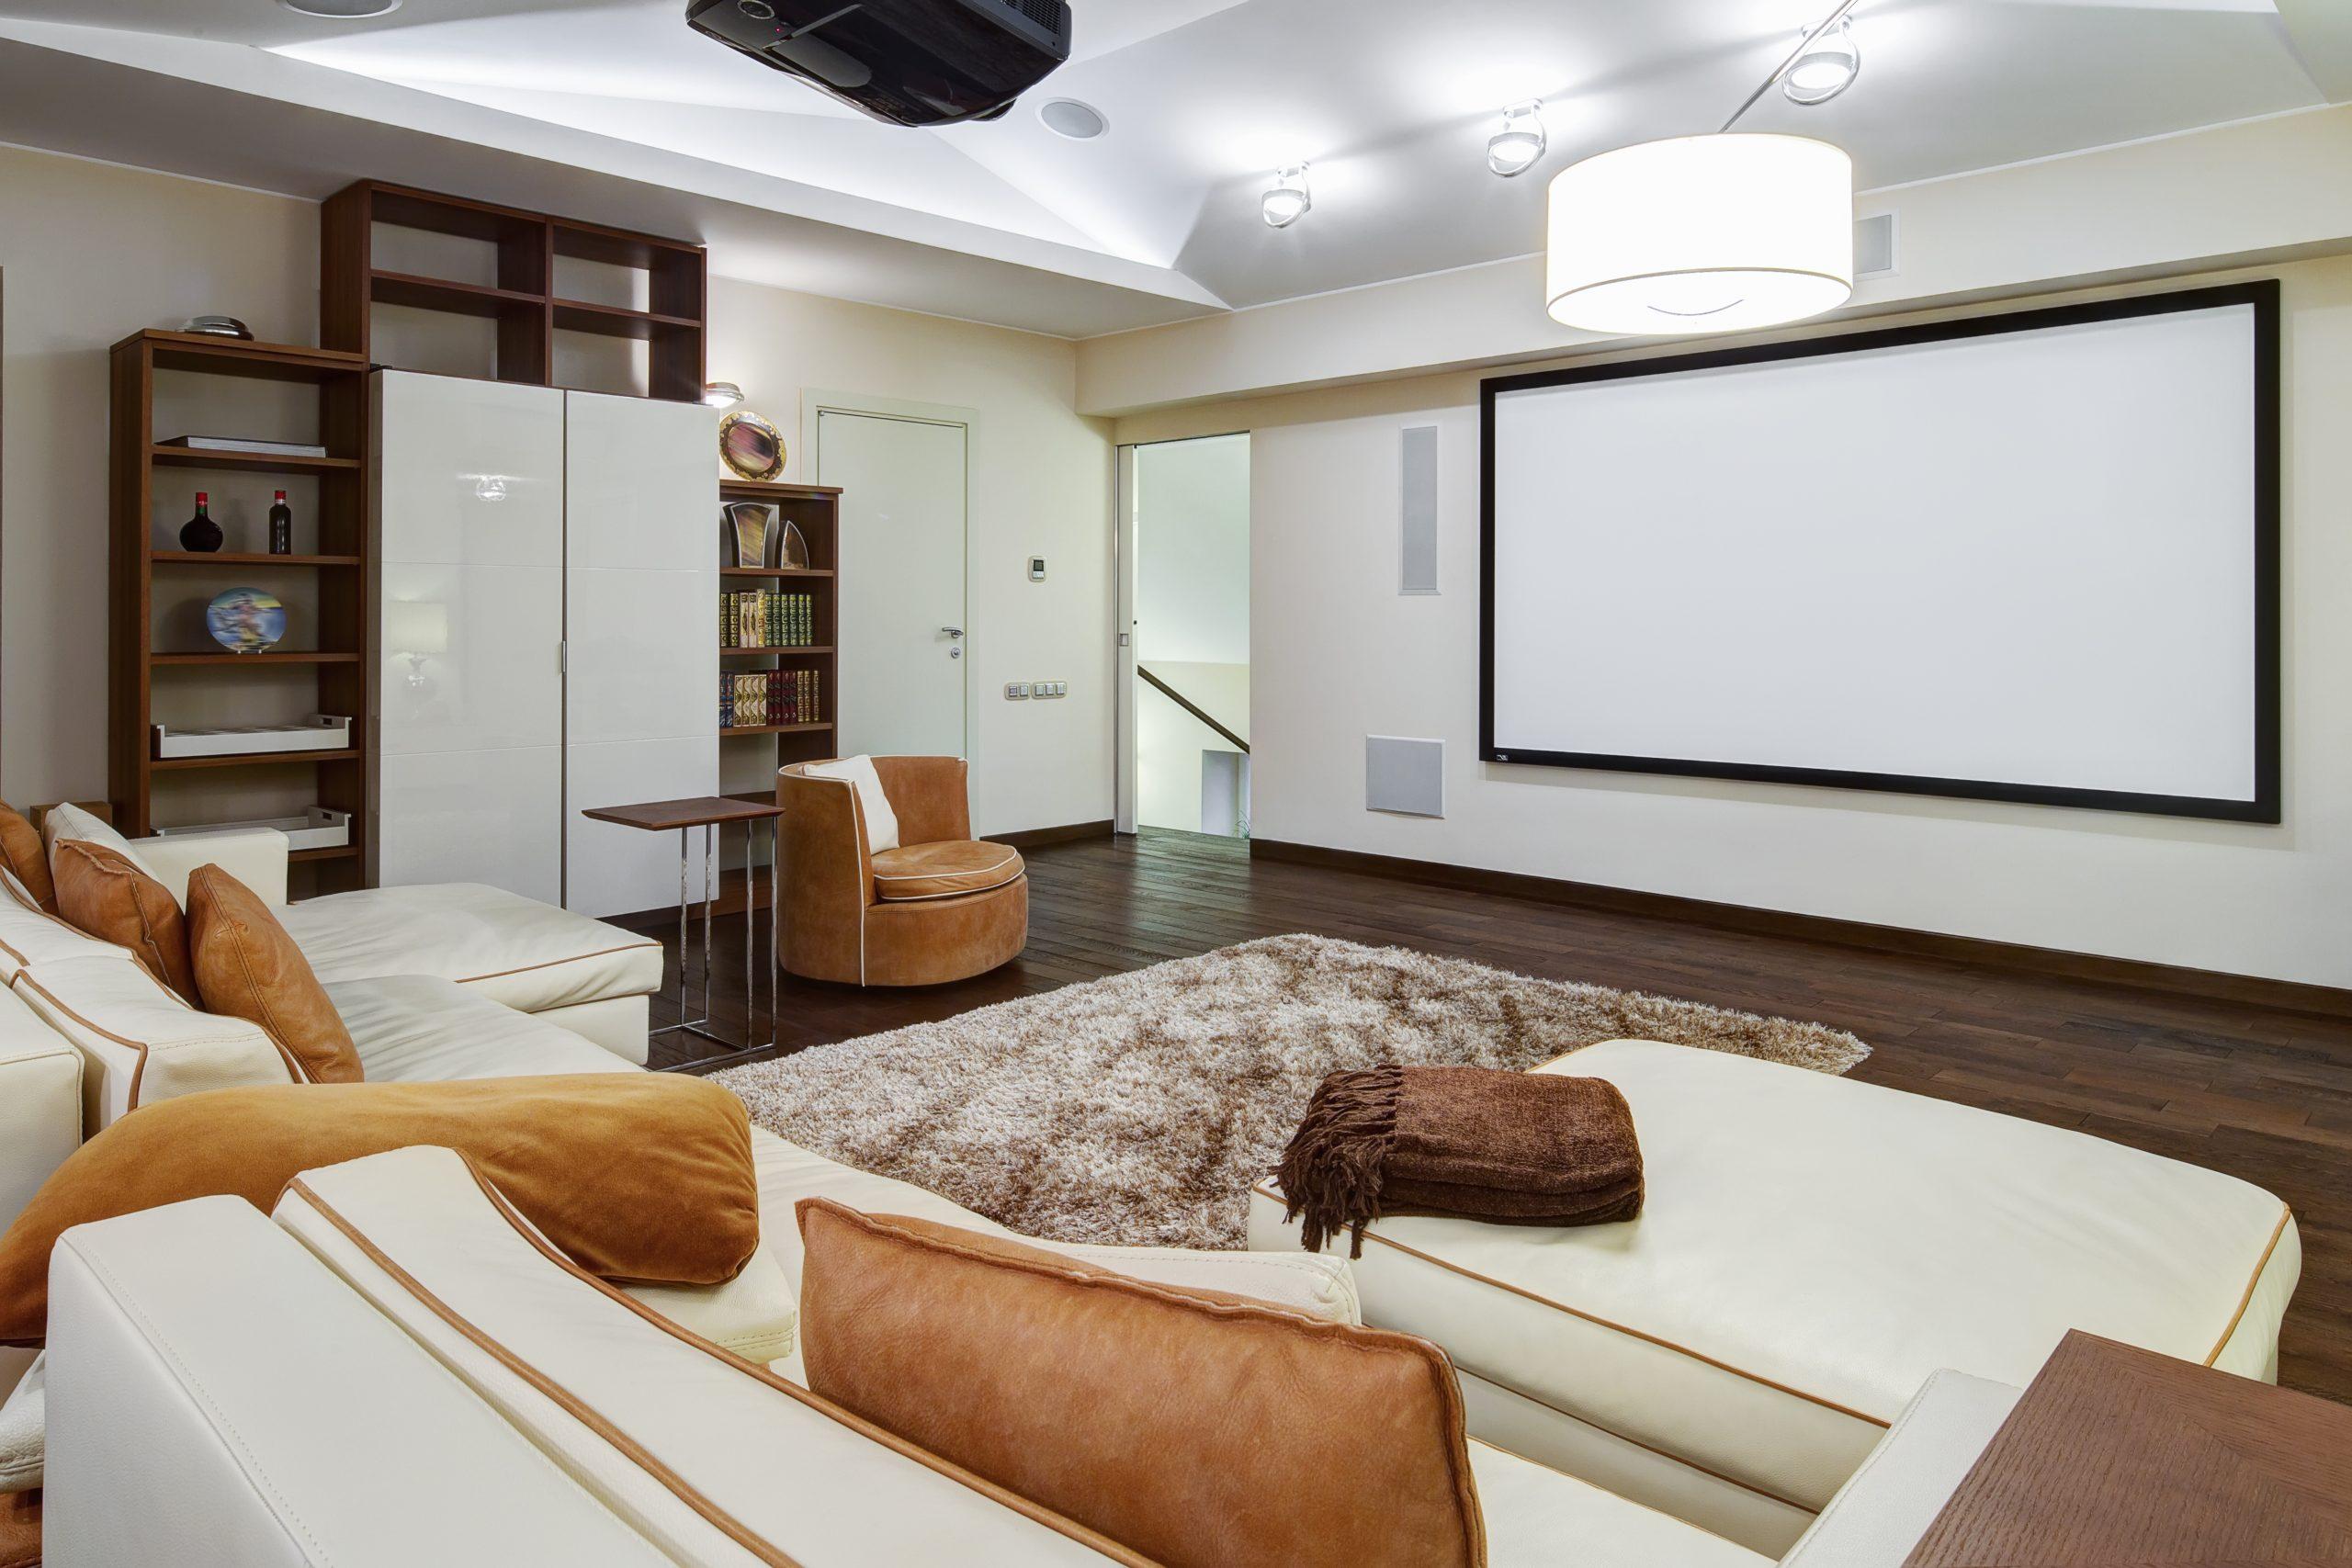 How To Design A Stylish And Functional Home Theater